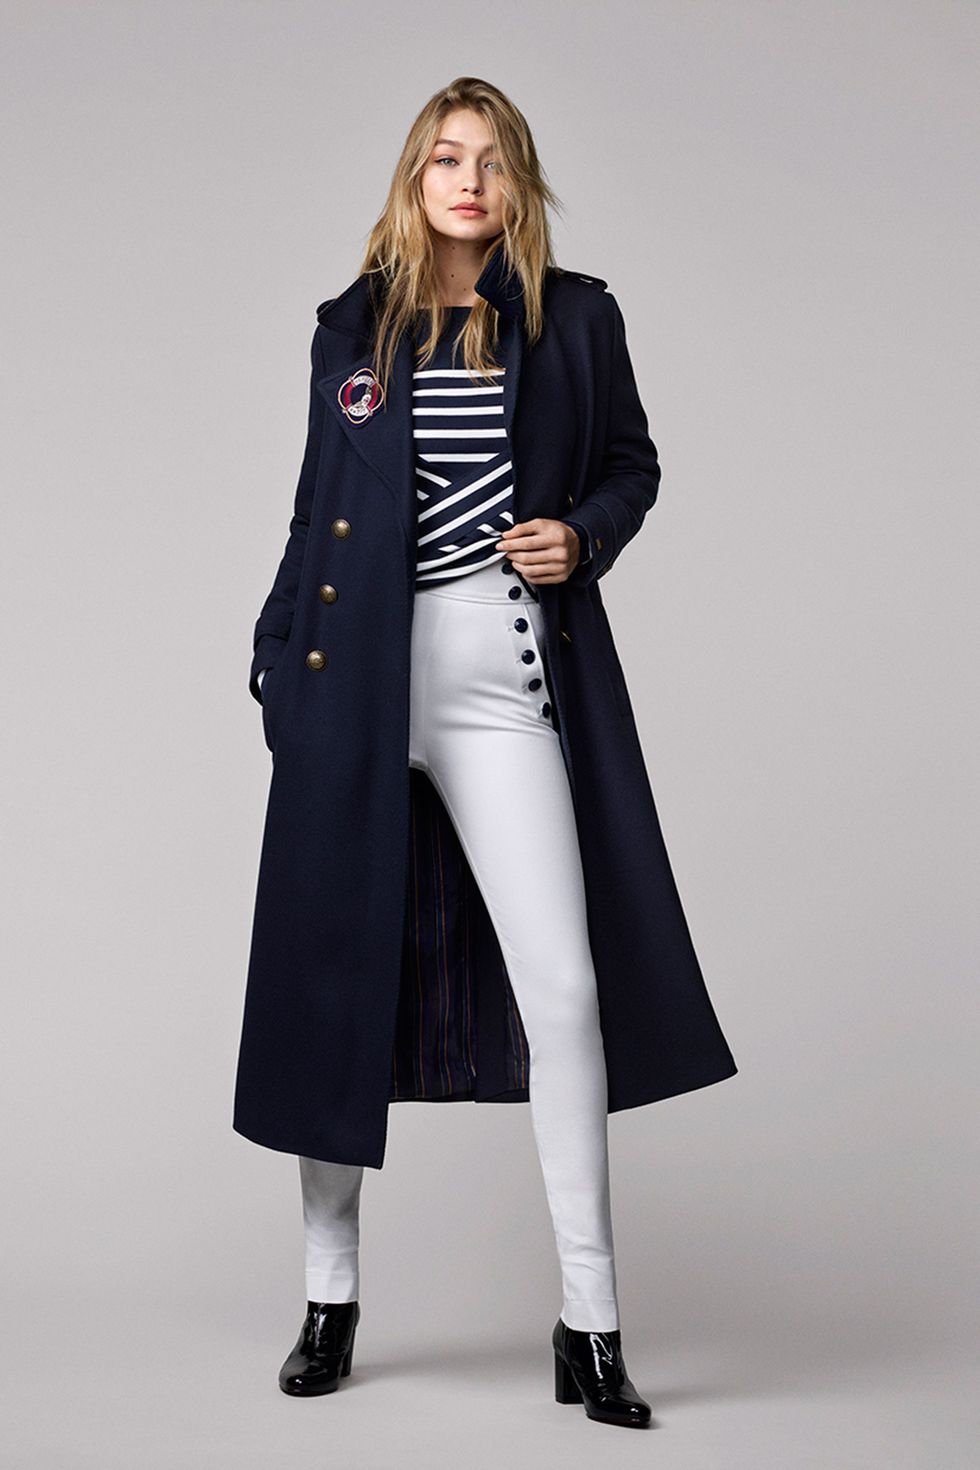 Gigi Hadid for Tommy Hilfiger clothing collection look book